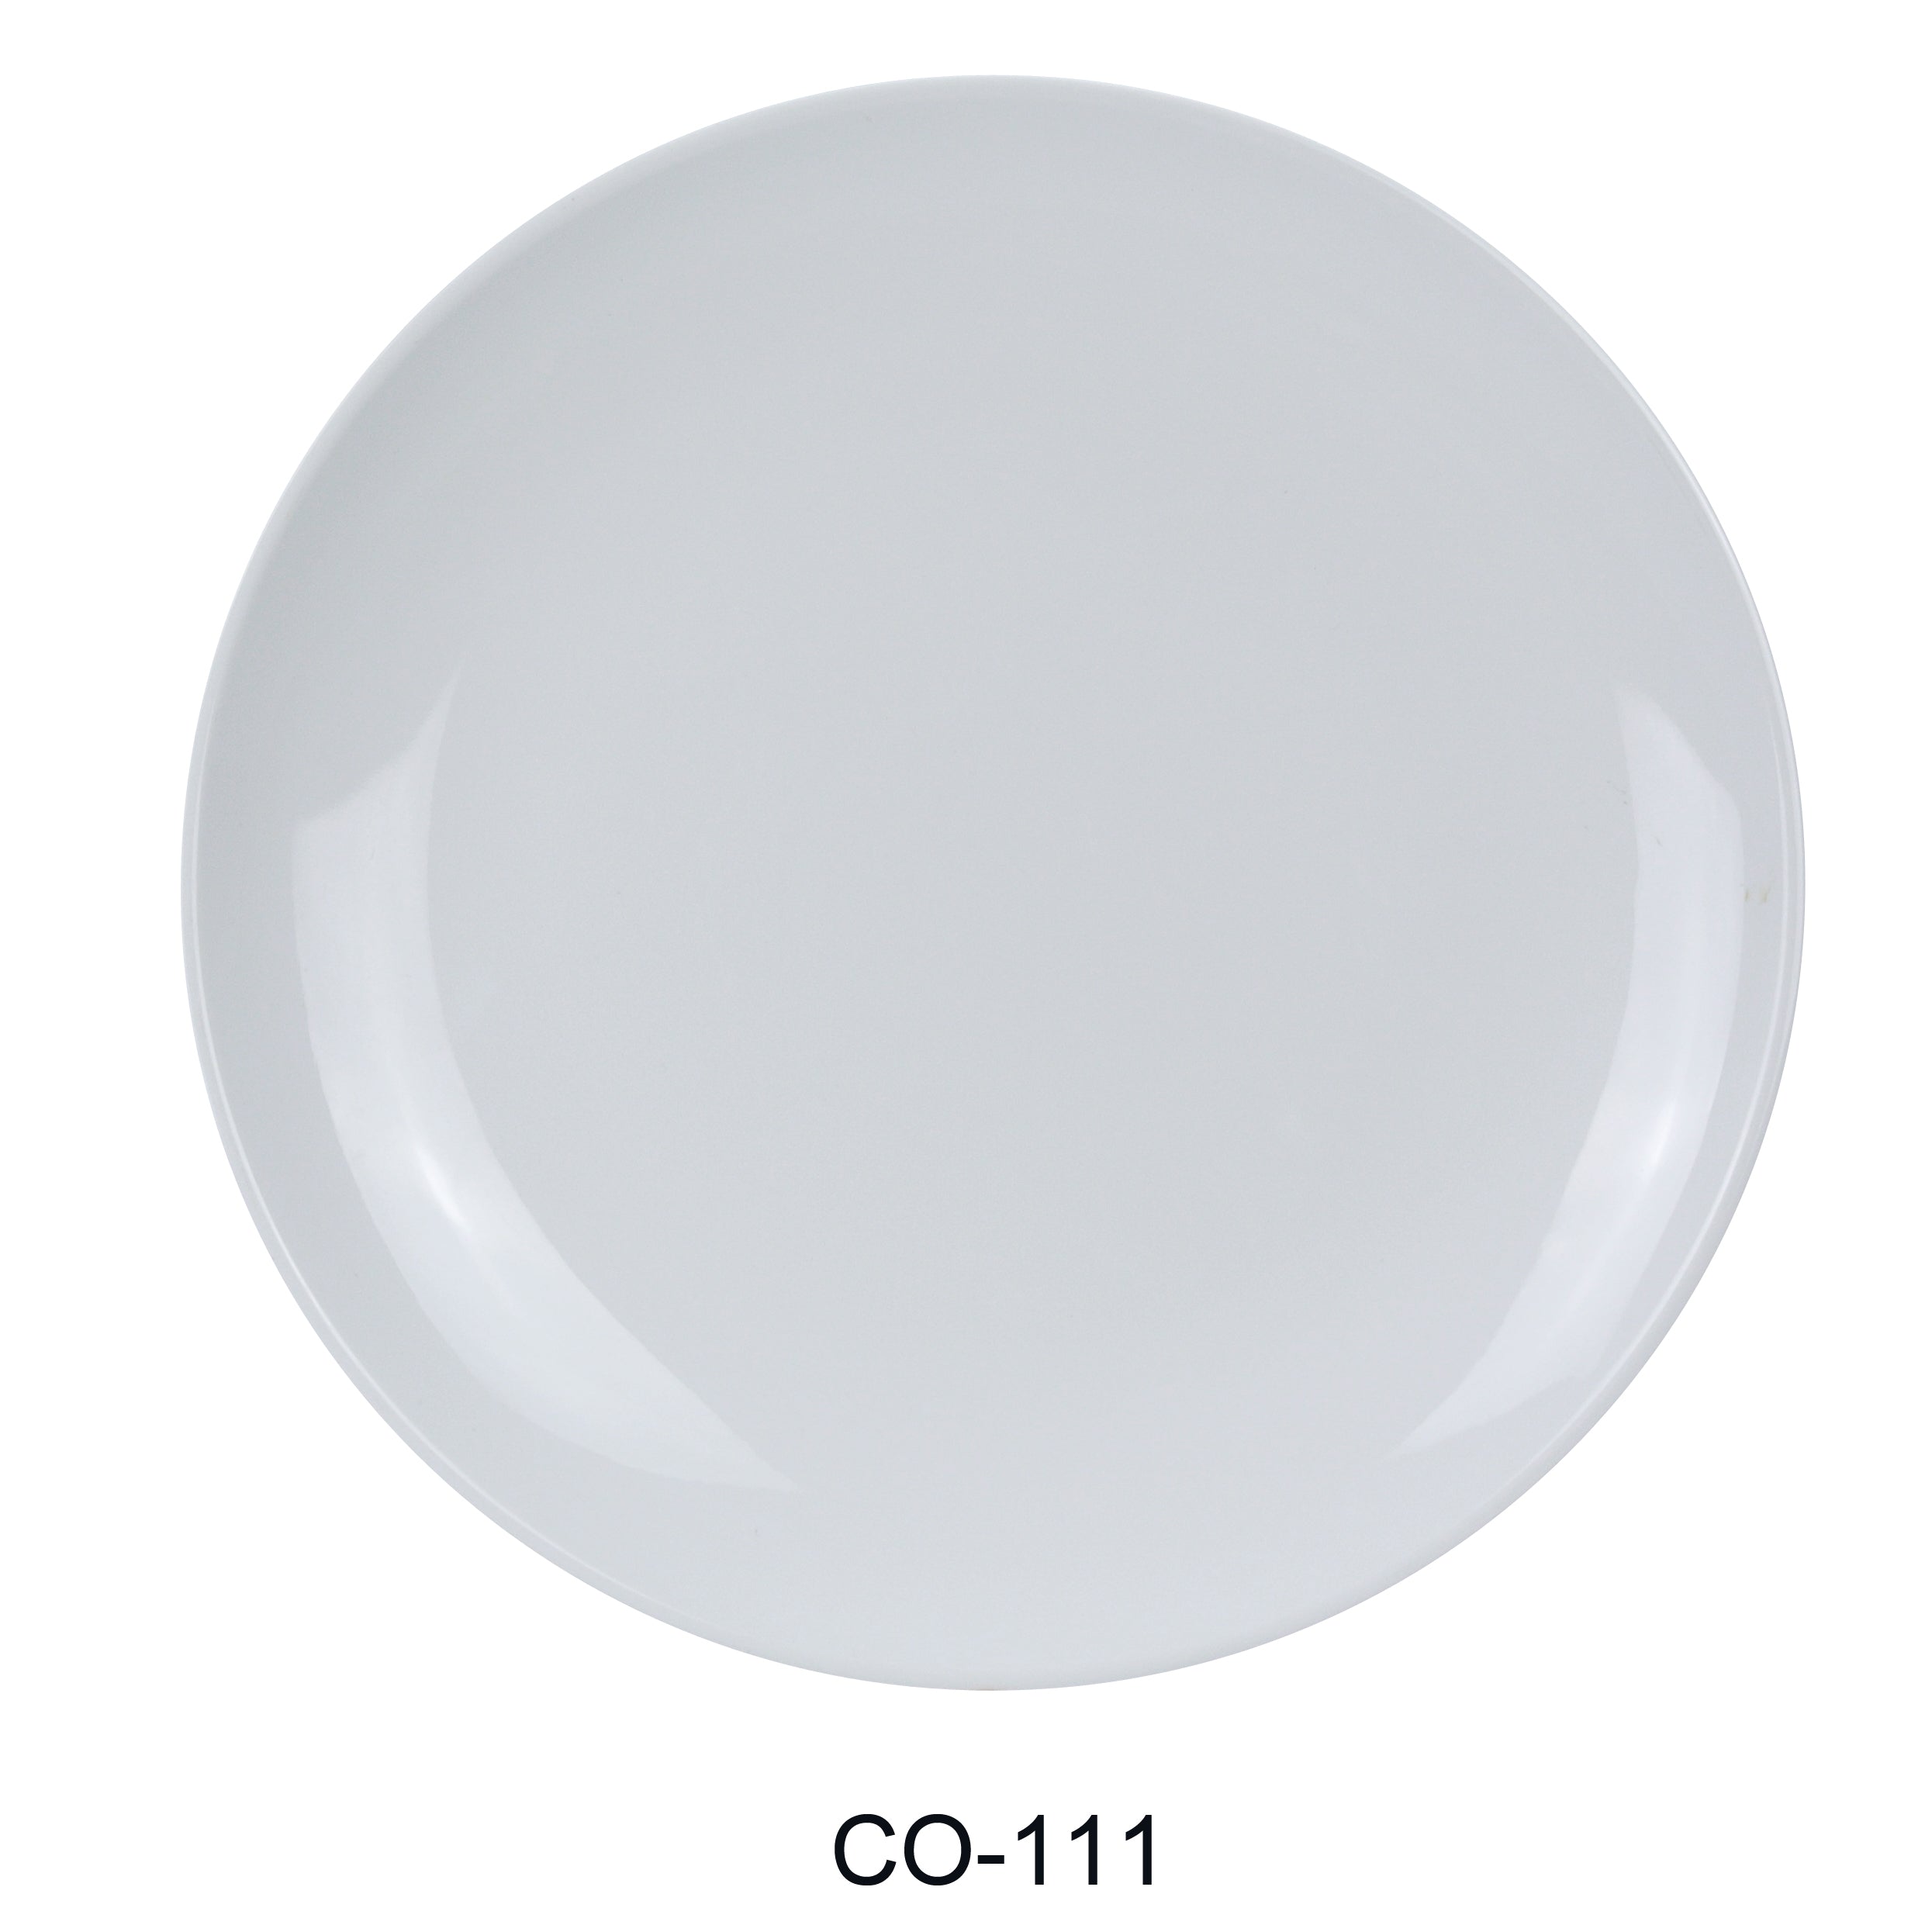 Yanco CO-111 Coupe Pattern Round Plate